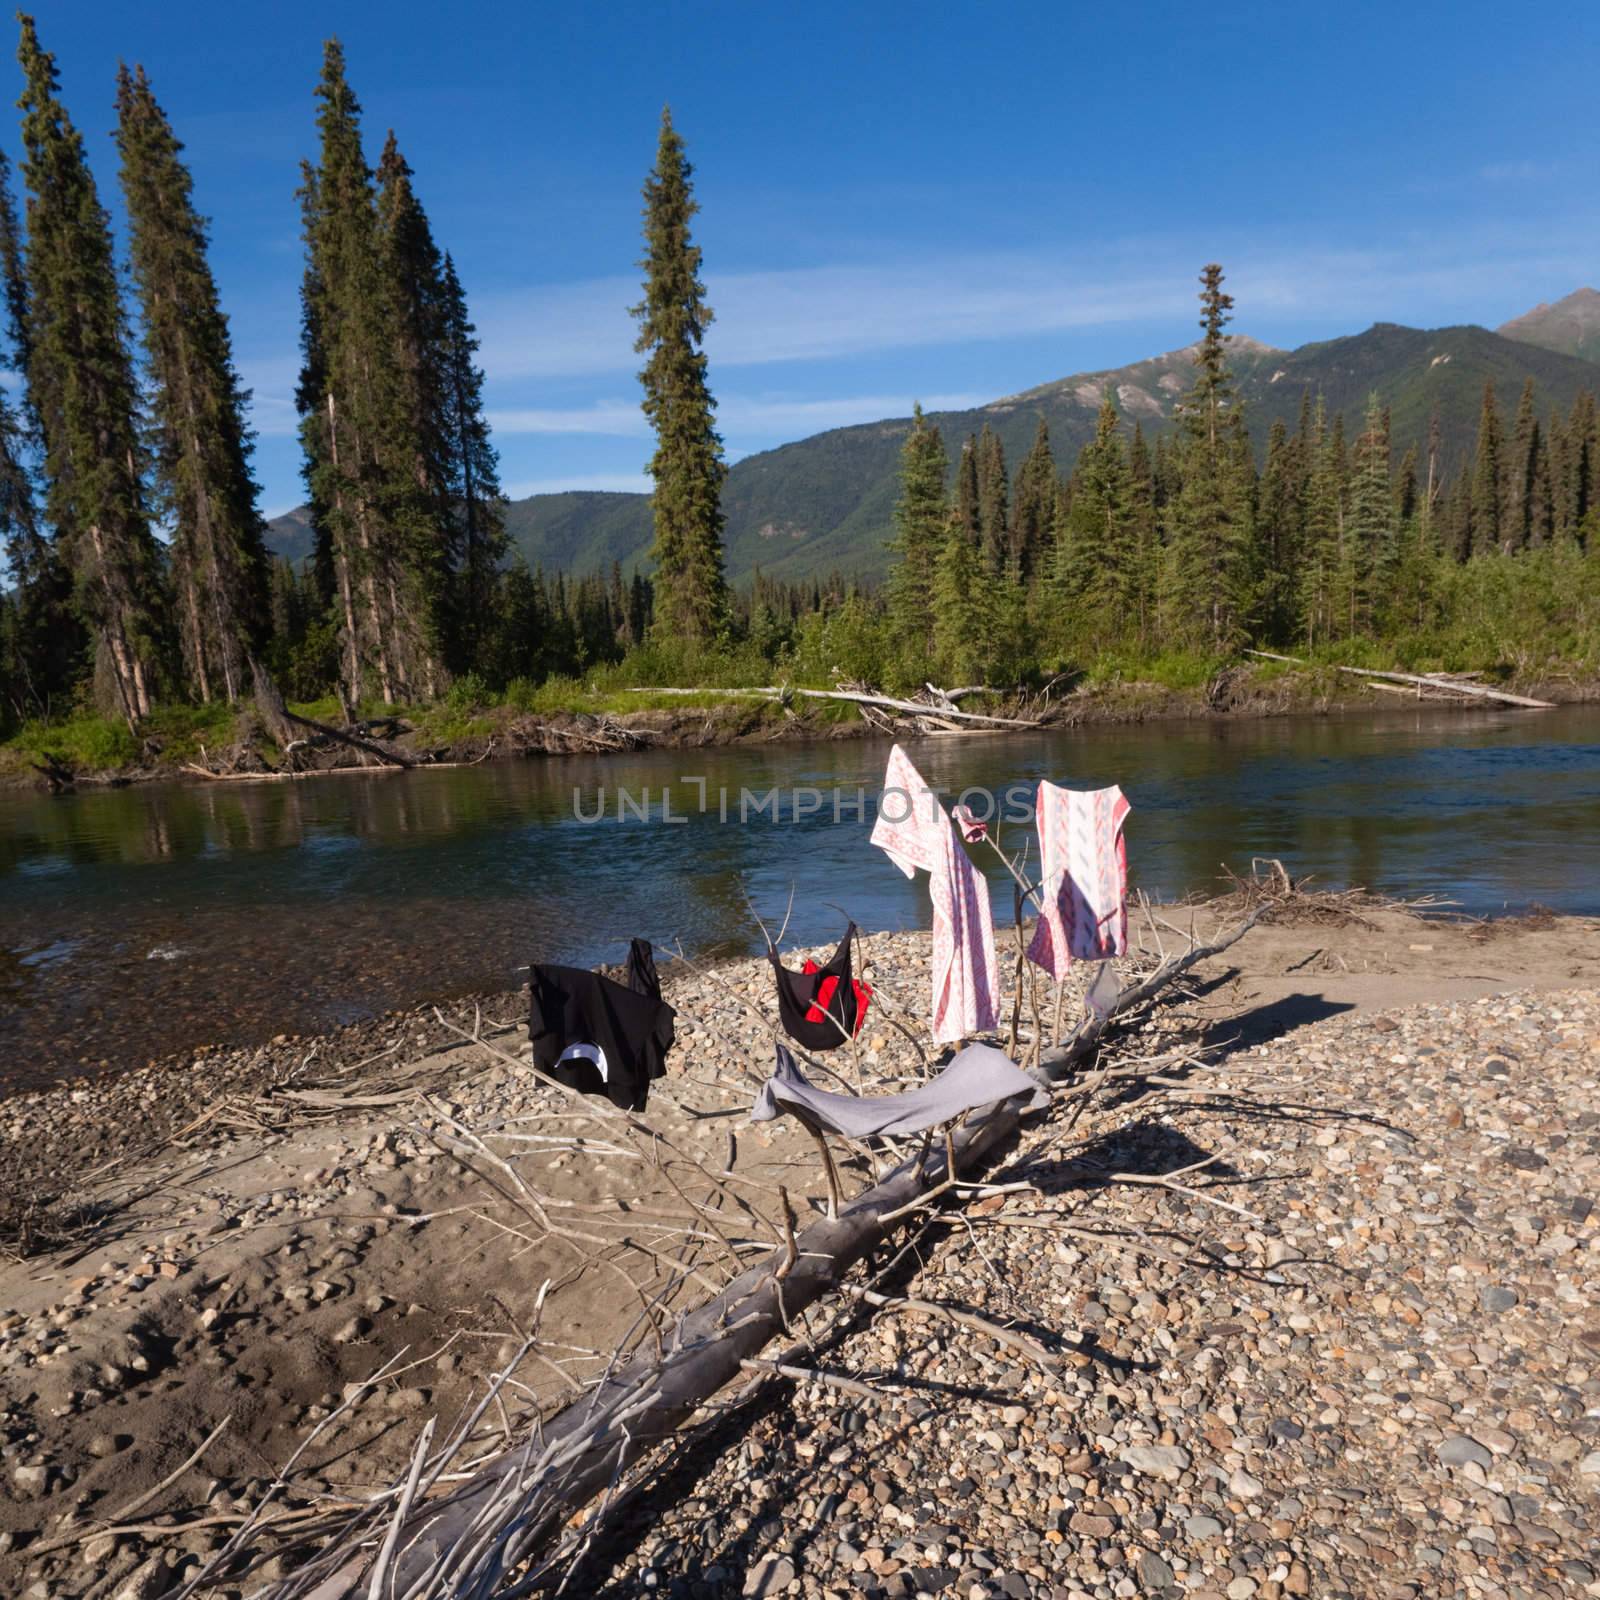 Drying clothes on river bank in pristine wilderness landscape, Big Salmon River, Yukon Territory, Canada